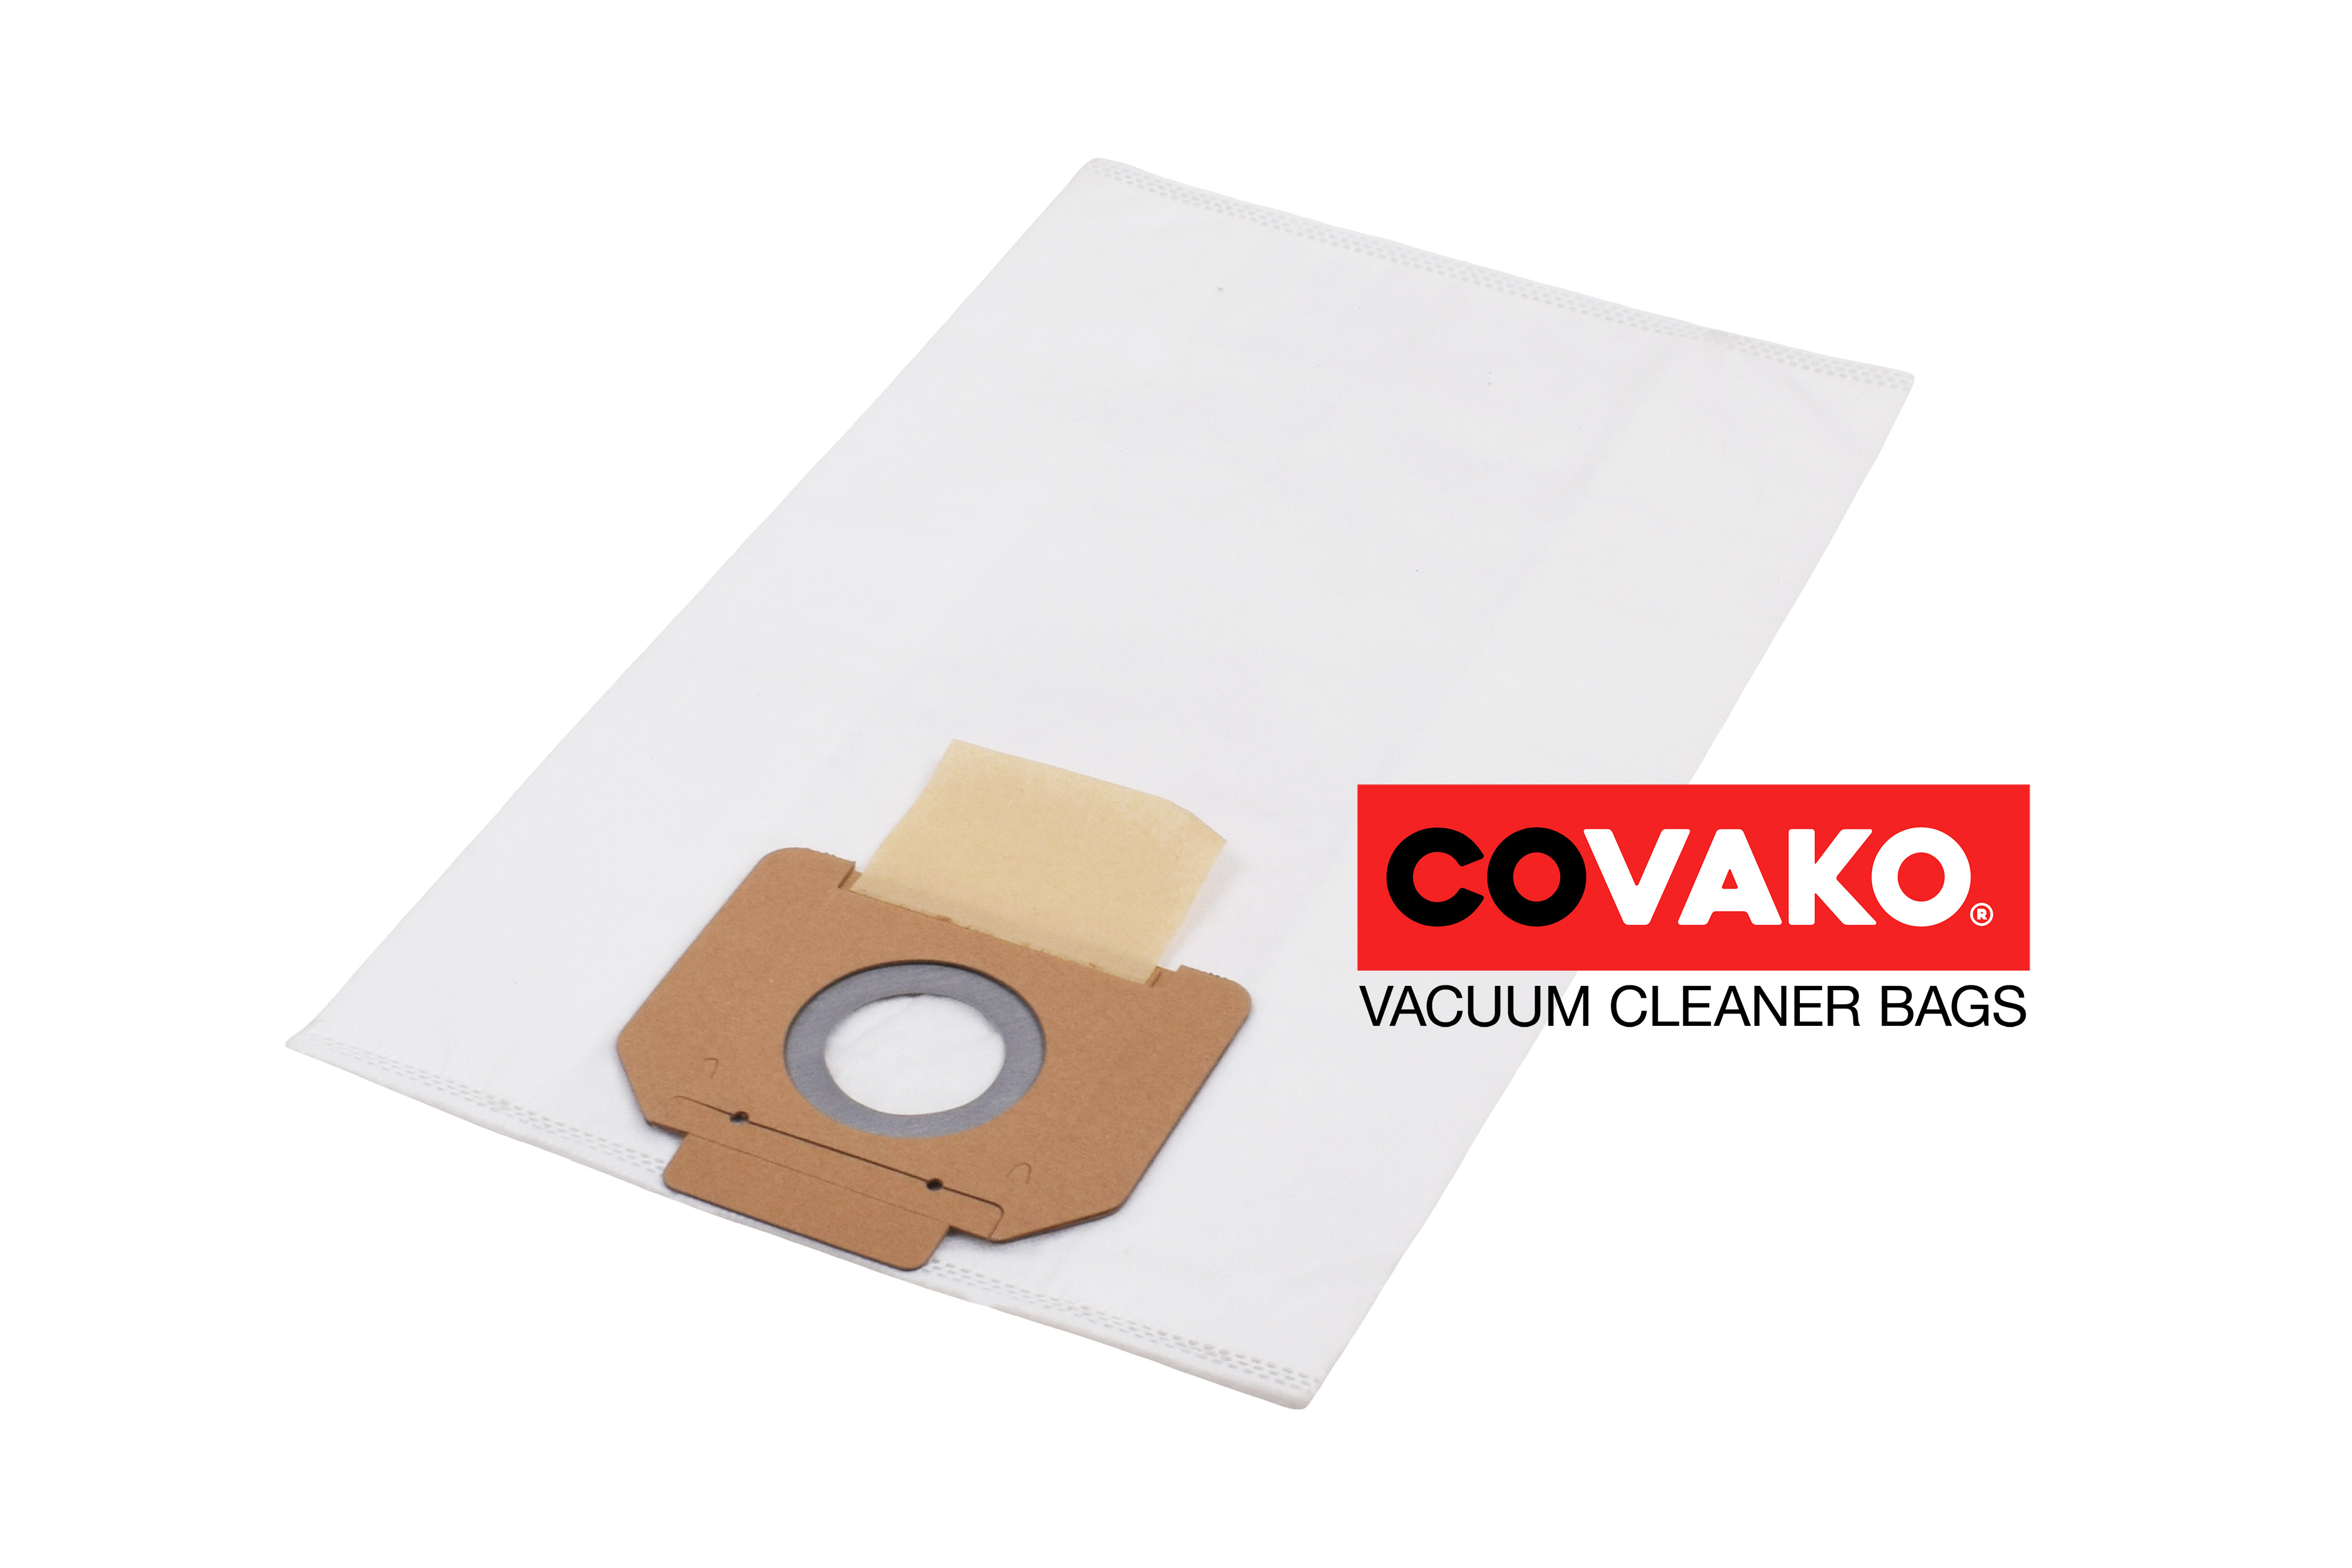 Soteco Windly 202 / Synthesis - Soteco vacuum cleaner bags